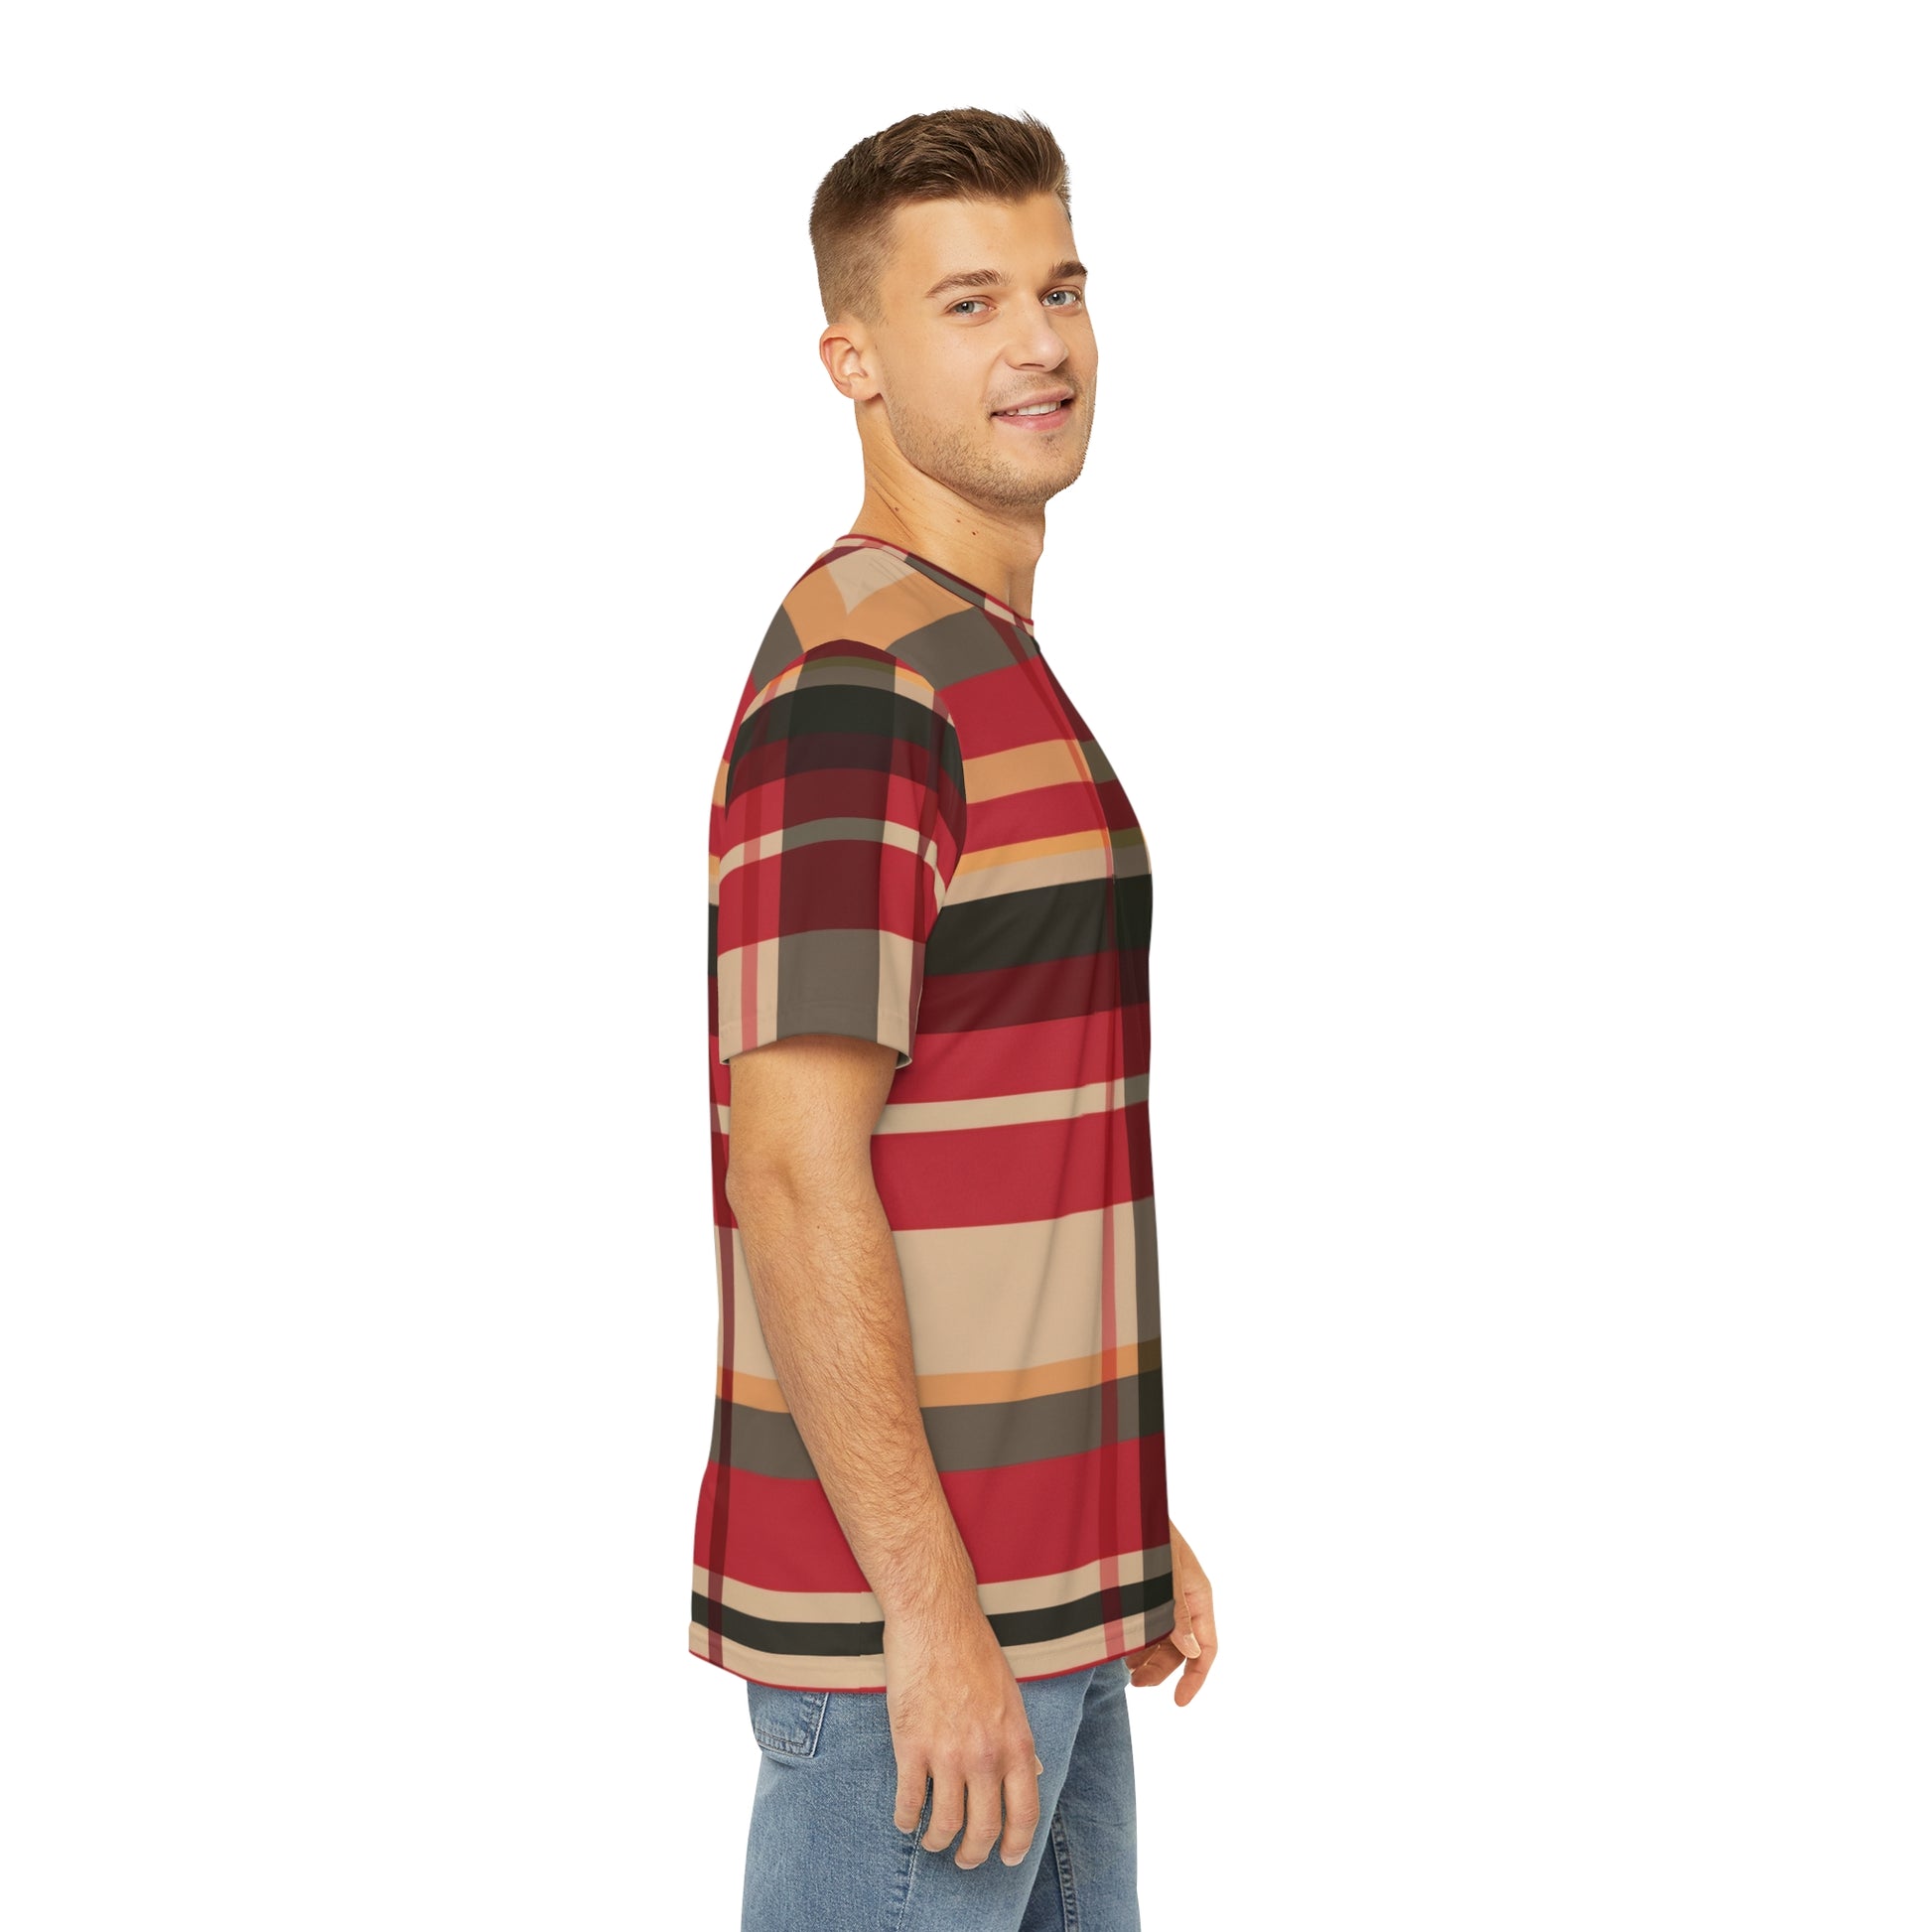 Side view of the McCloud Mist Tartan Crewneck Pullover Short-Sleeved All-Over Print Shirt red black and beige plaid pattern worn by a white male paired with casual denim jeans